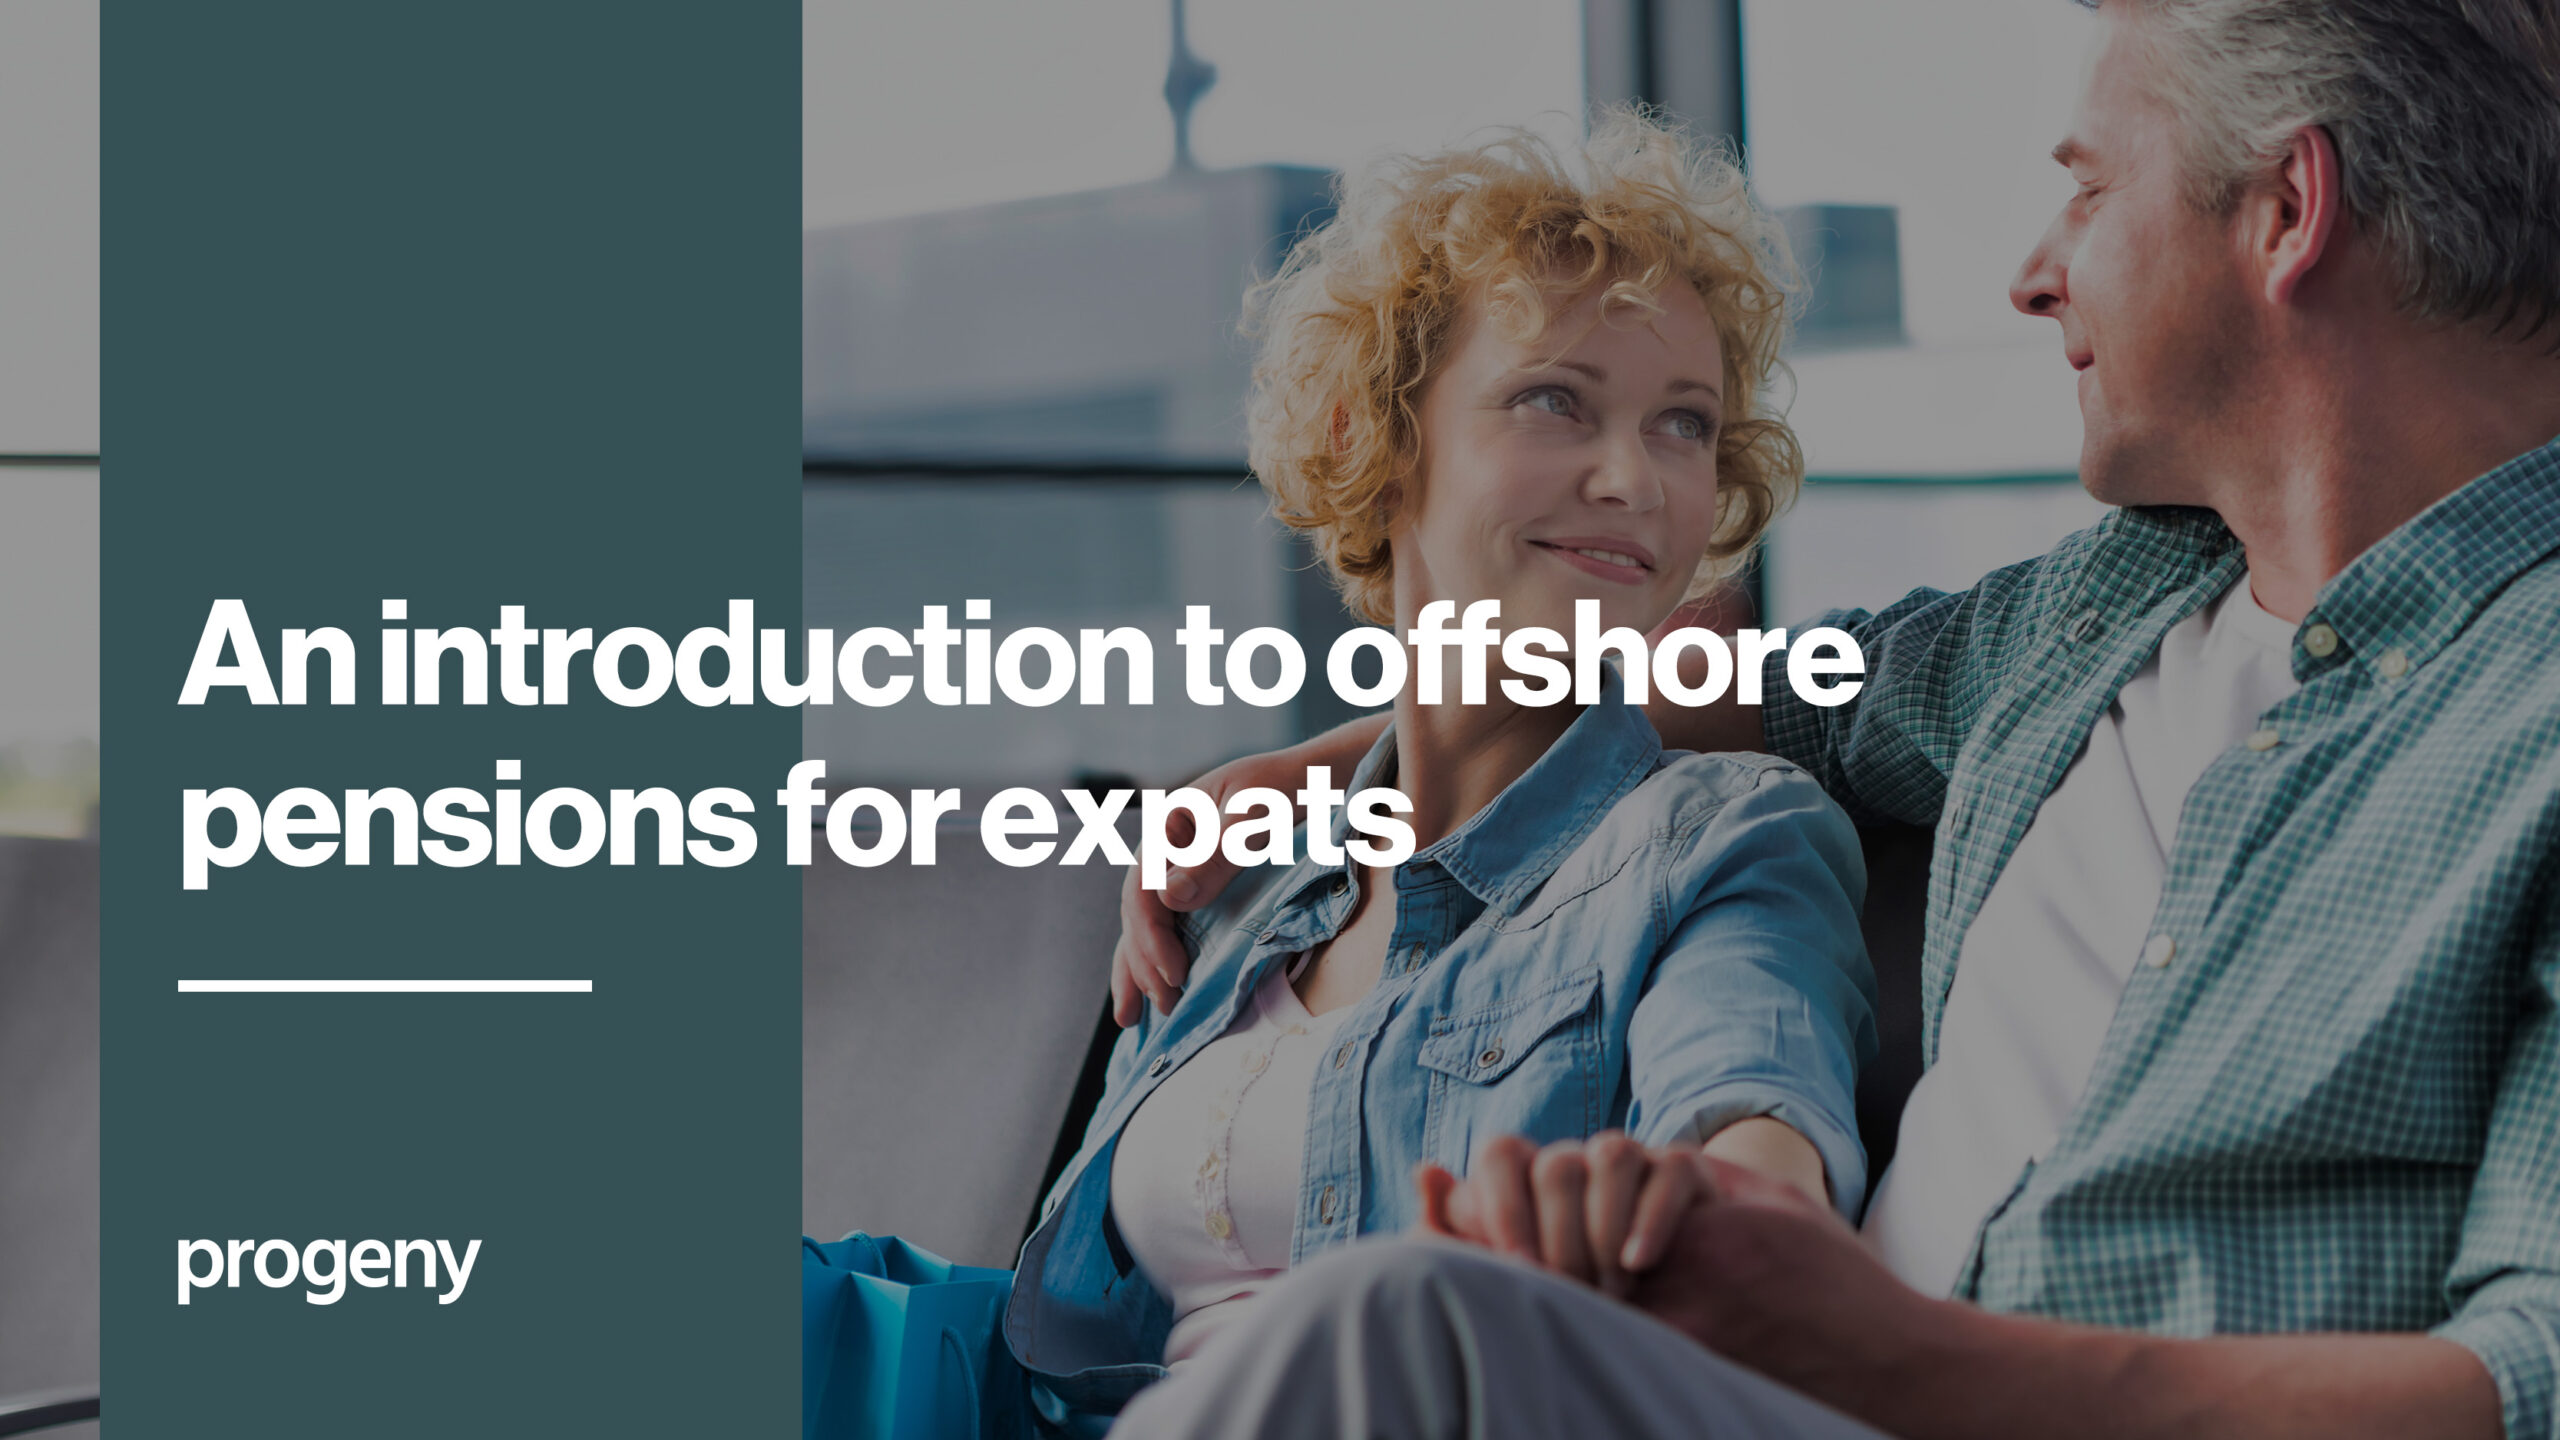 An introduction to offshore pensions for expats